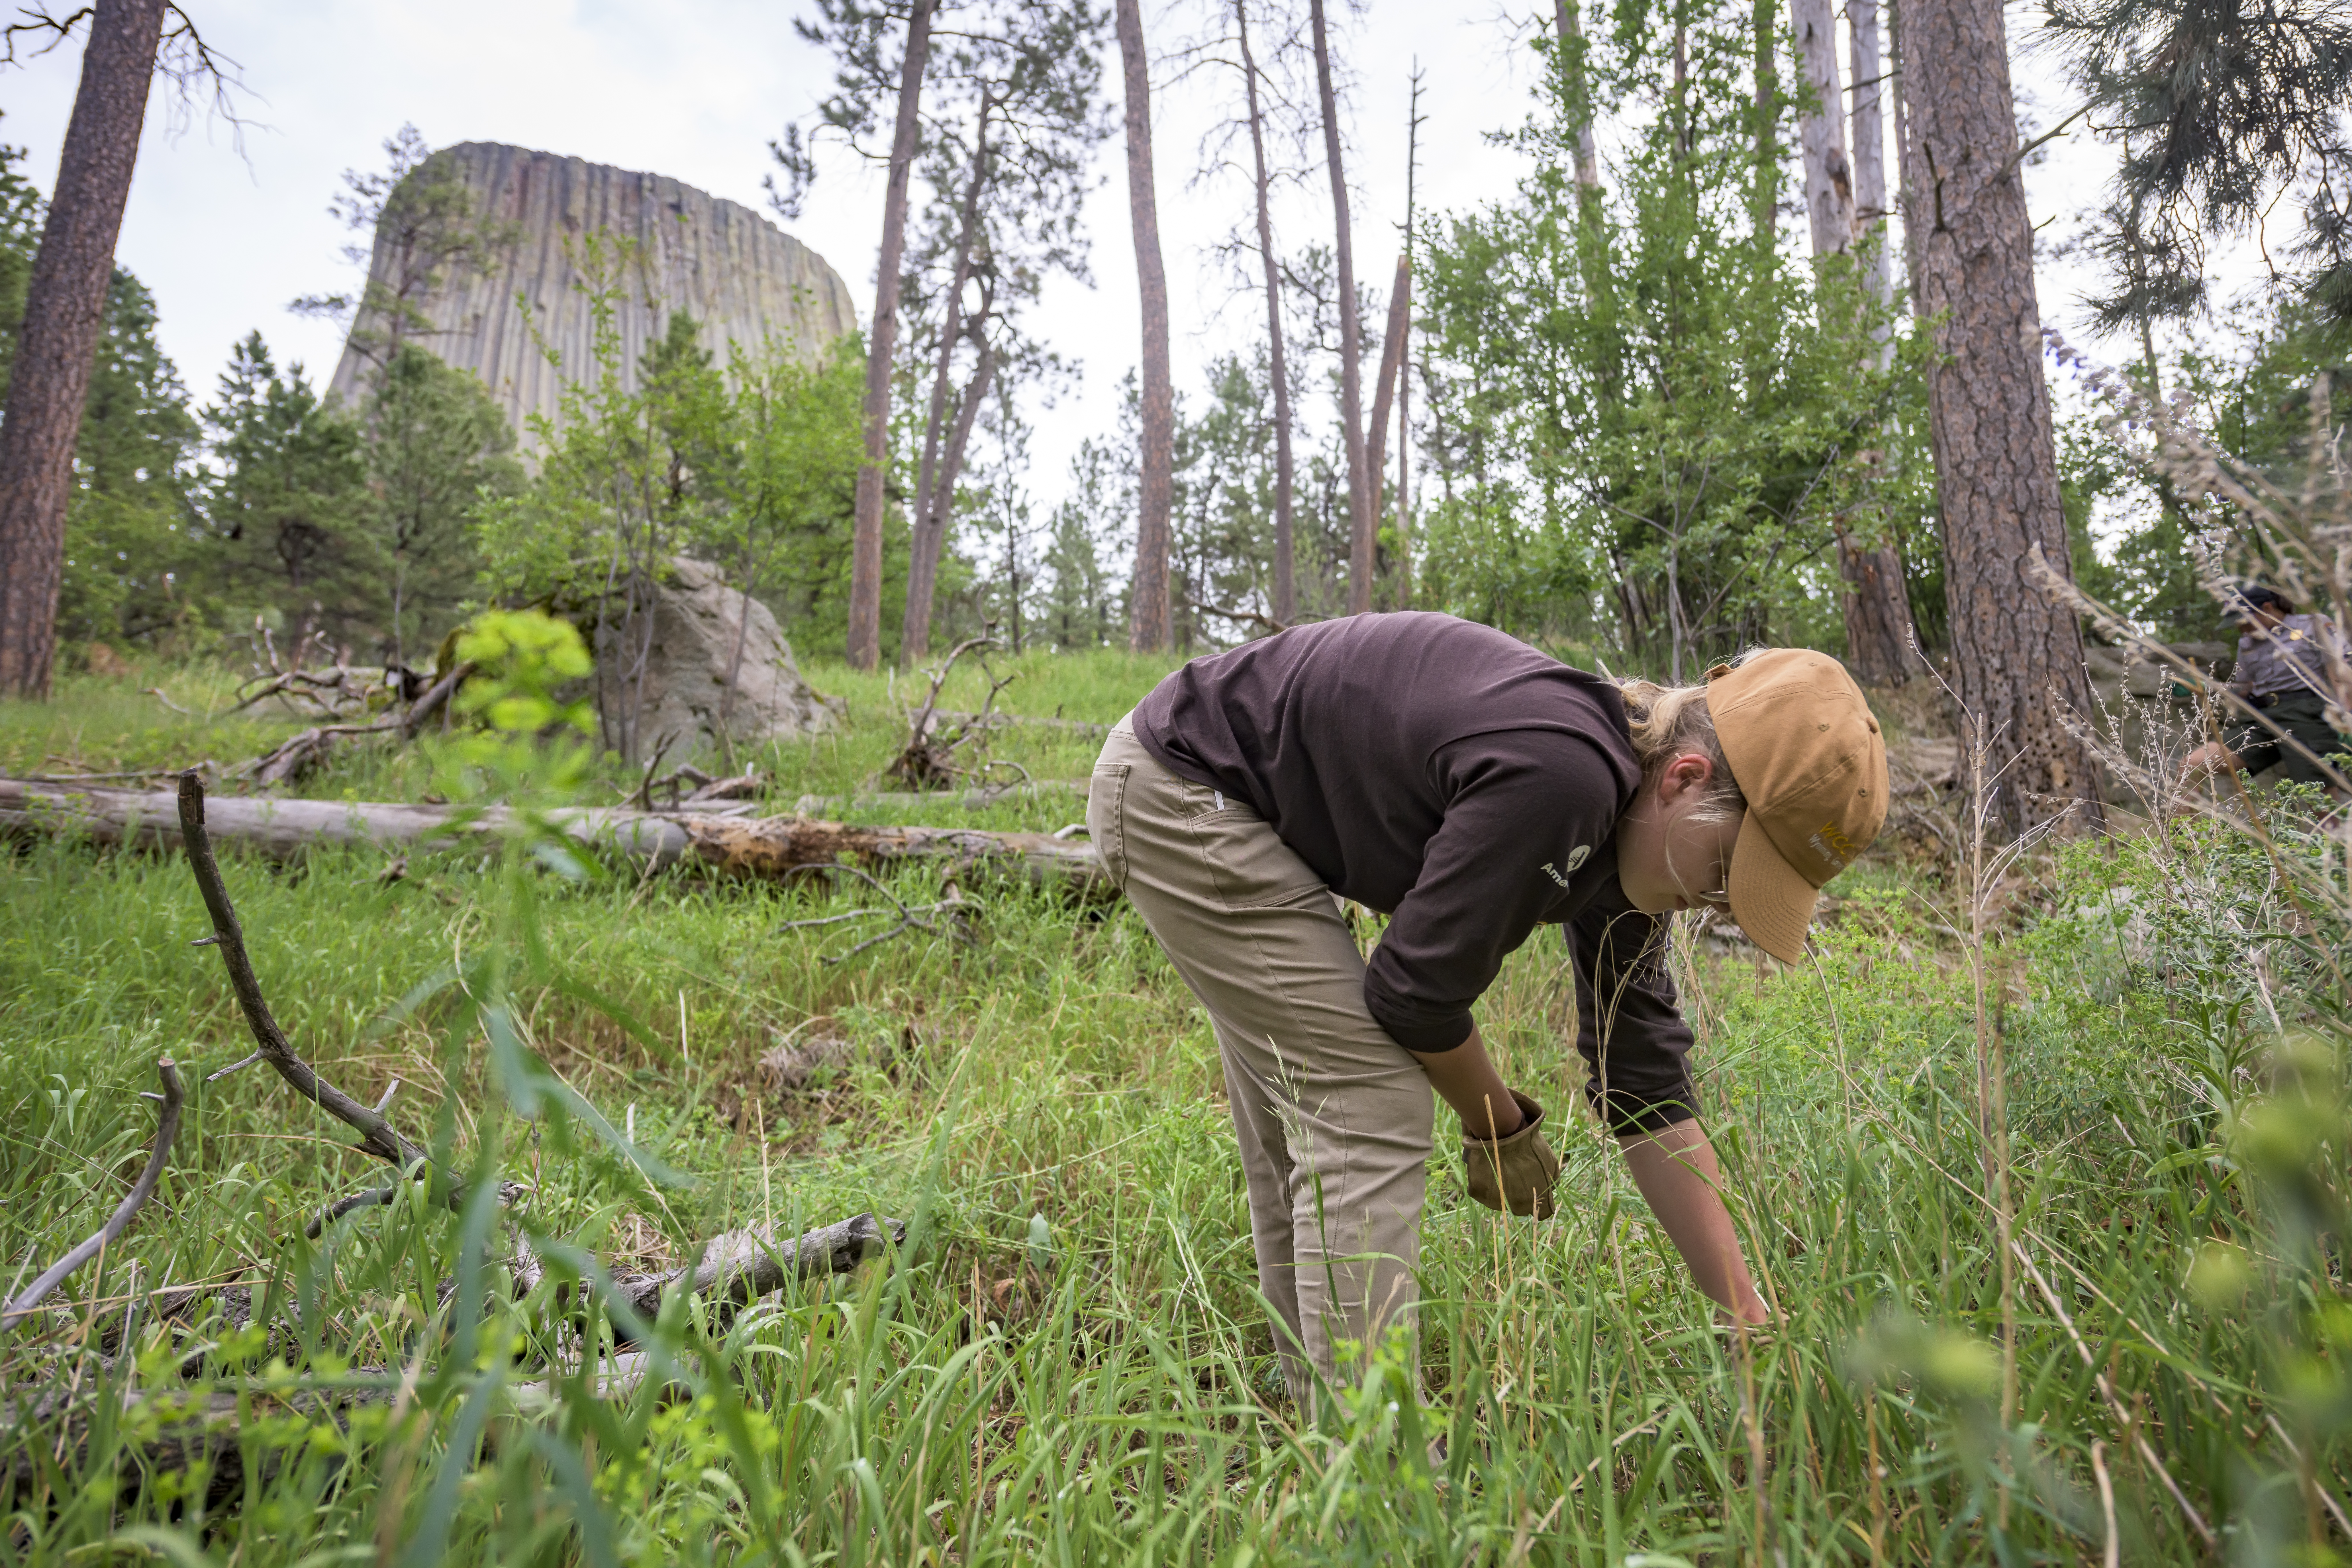 Service corps crew working helping control invasive vegetation at Devils Tower National Monument